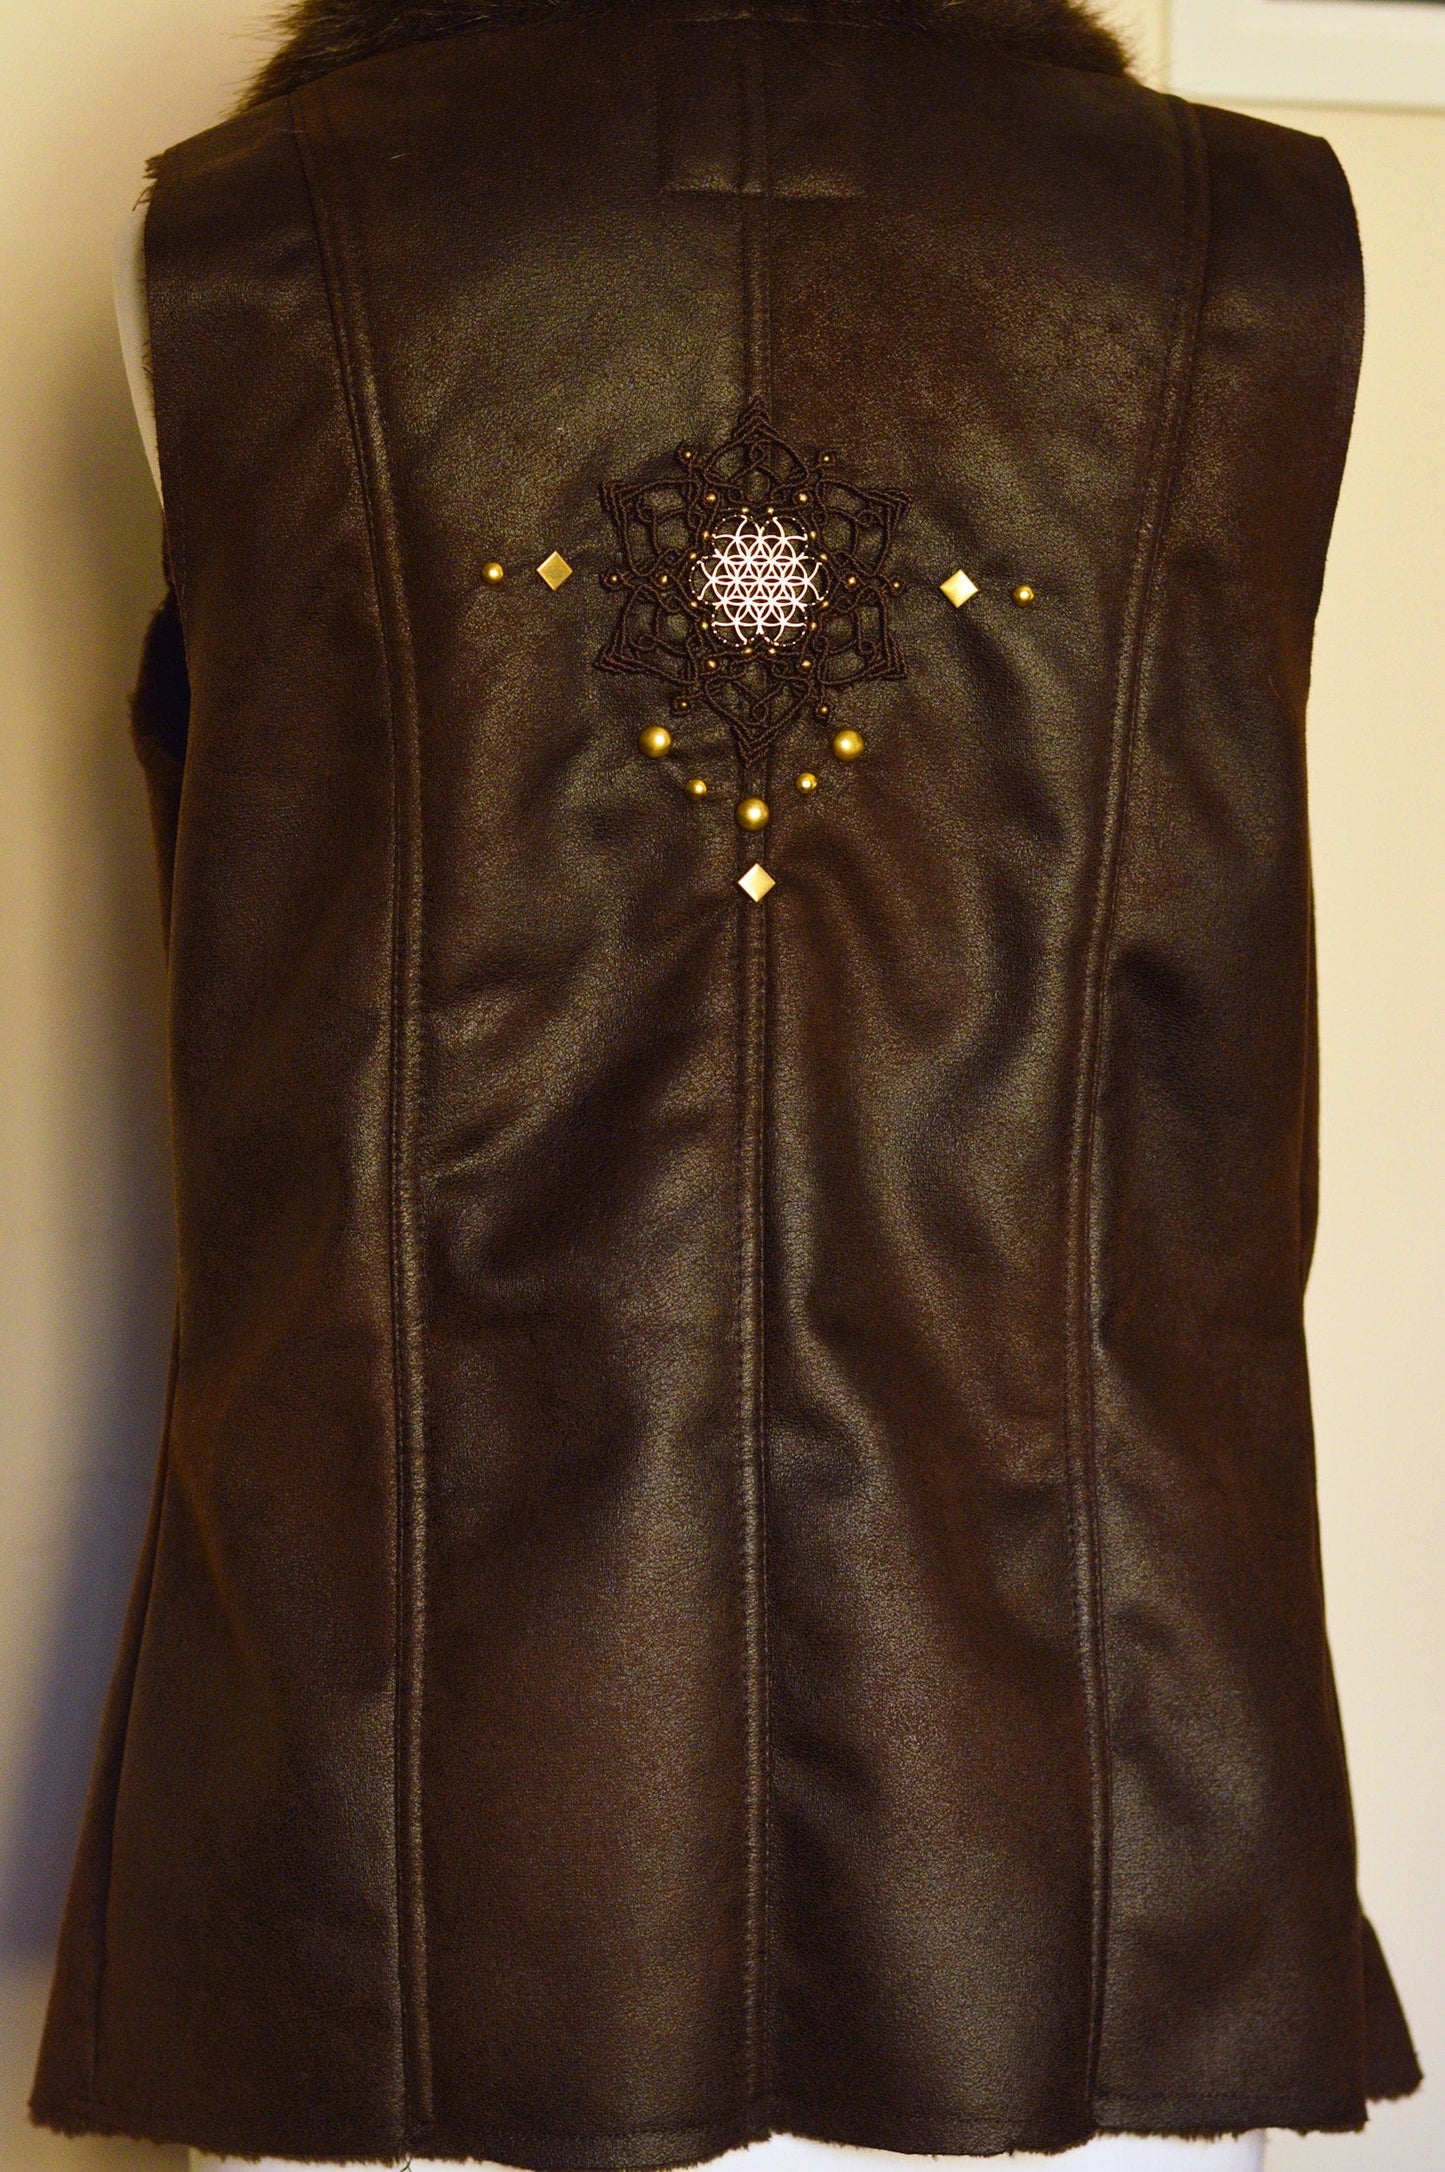 Eco leather dark brown waistcoat with macrame applique and studs